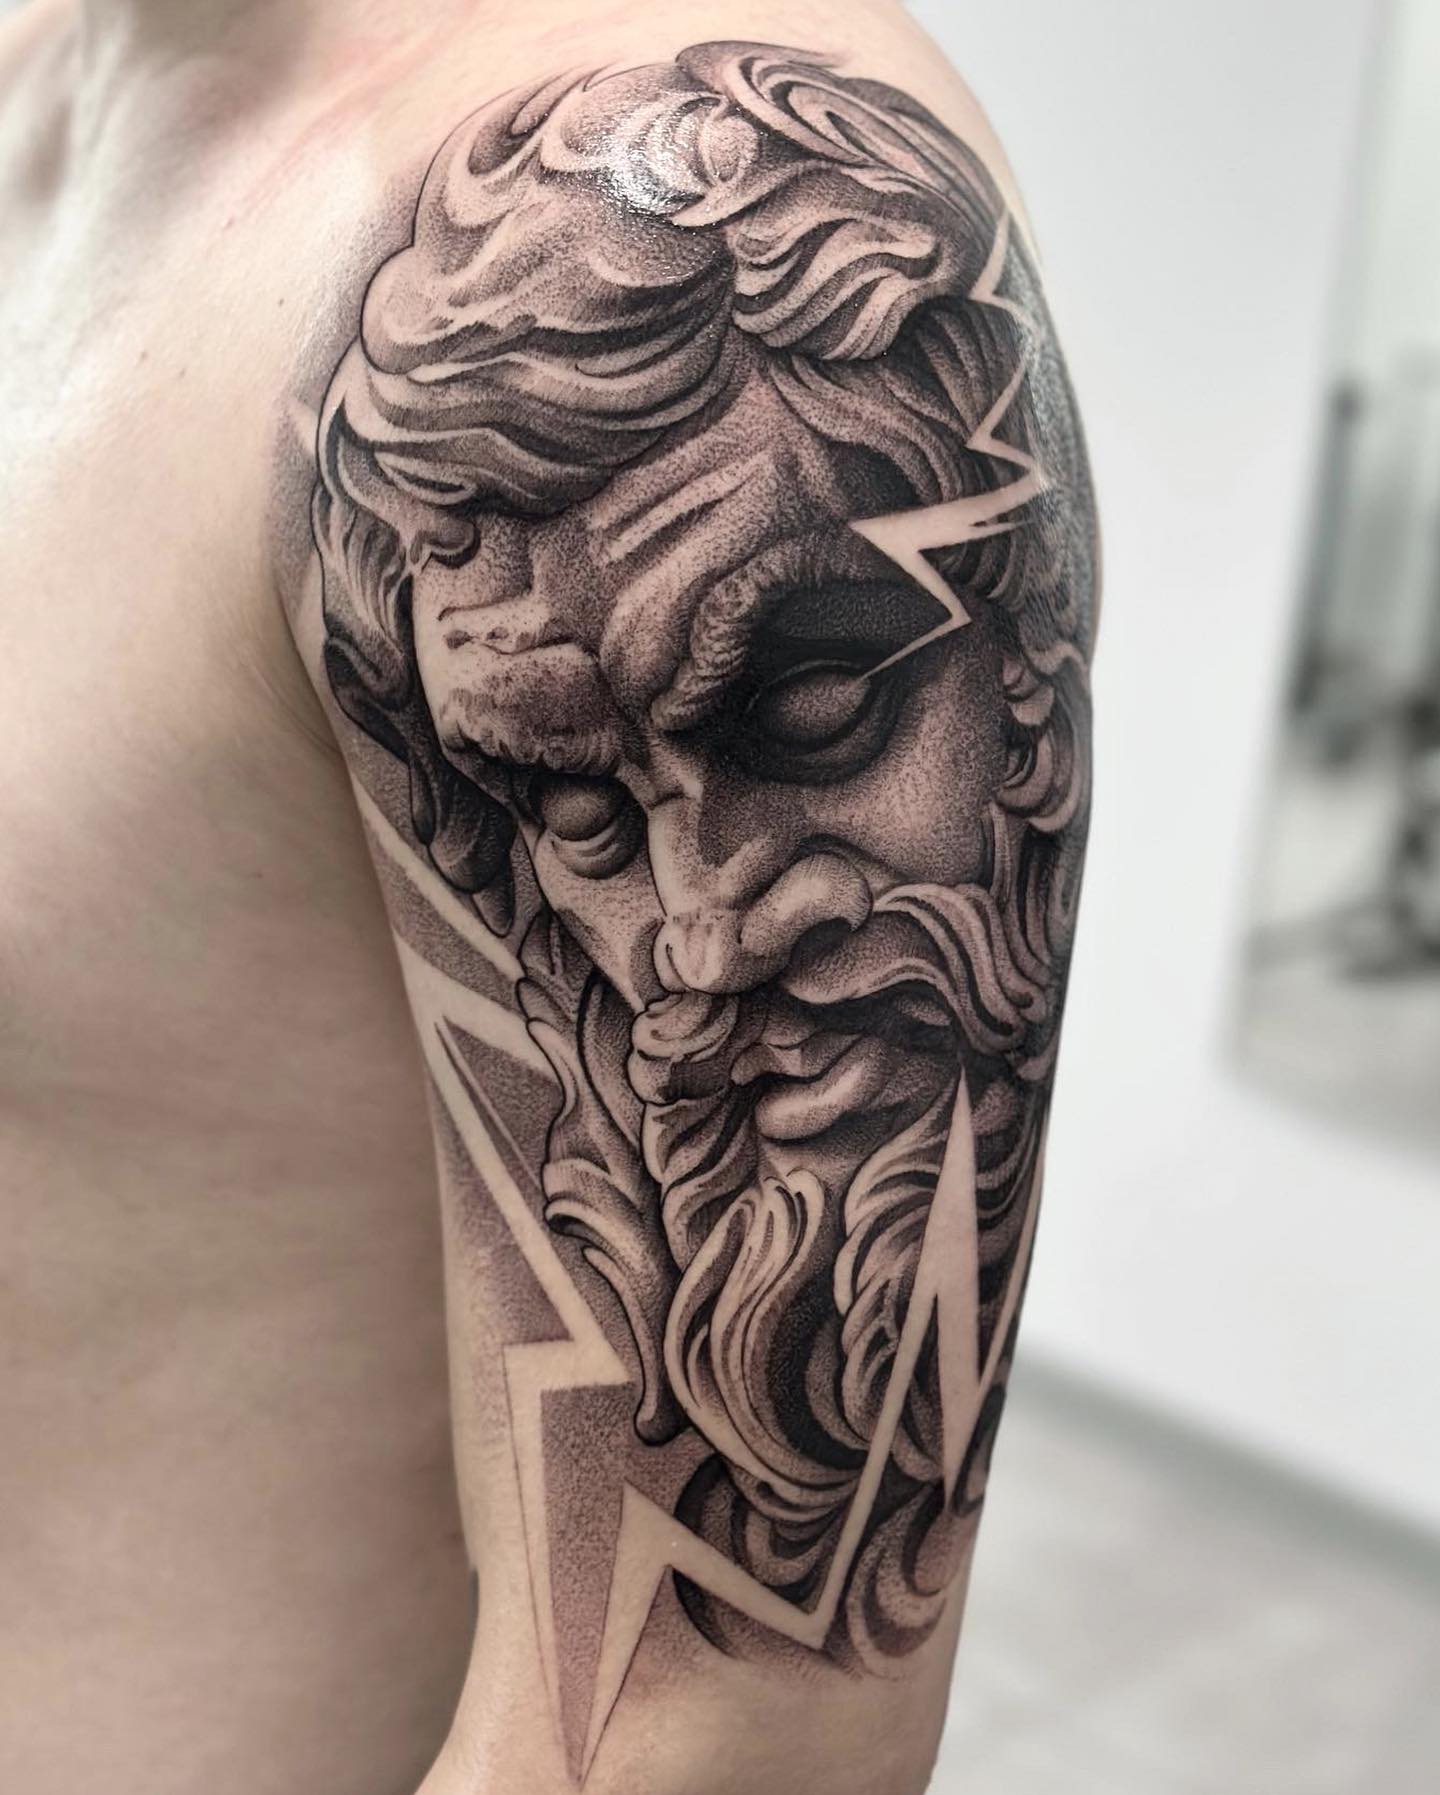 Zeus tattoo on my clients outer forearm 🔥 ready to take on new tattoos for  the year! Message me here on instagram or fill out the form... | Instagram